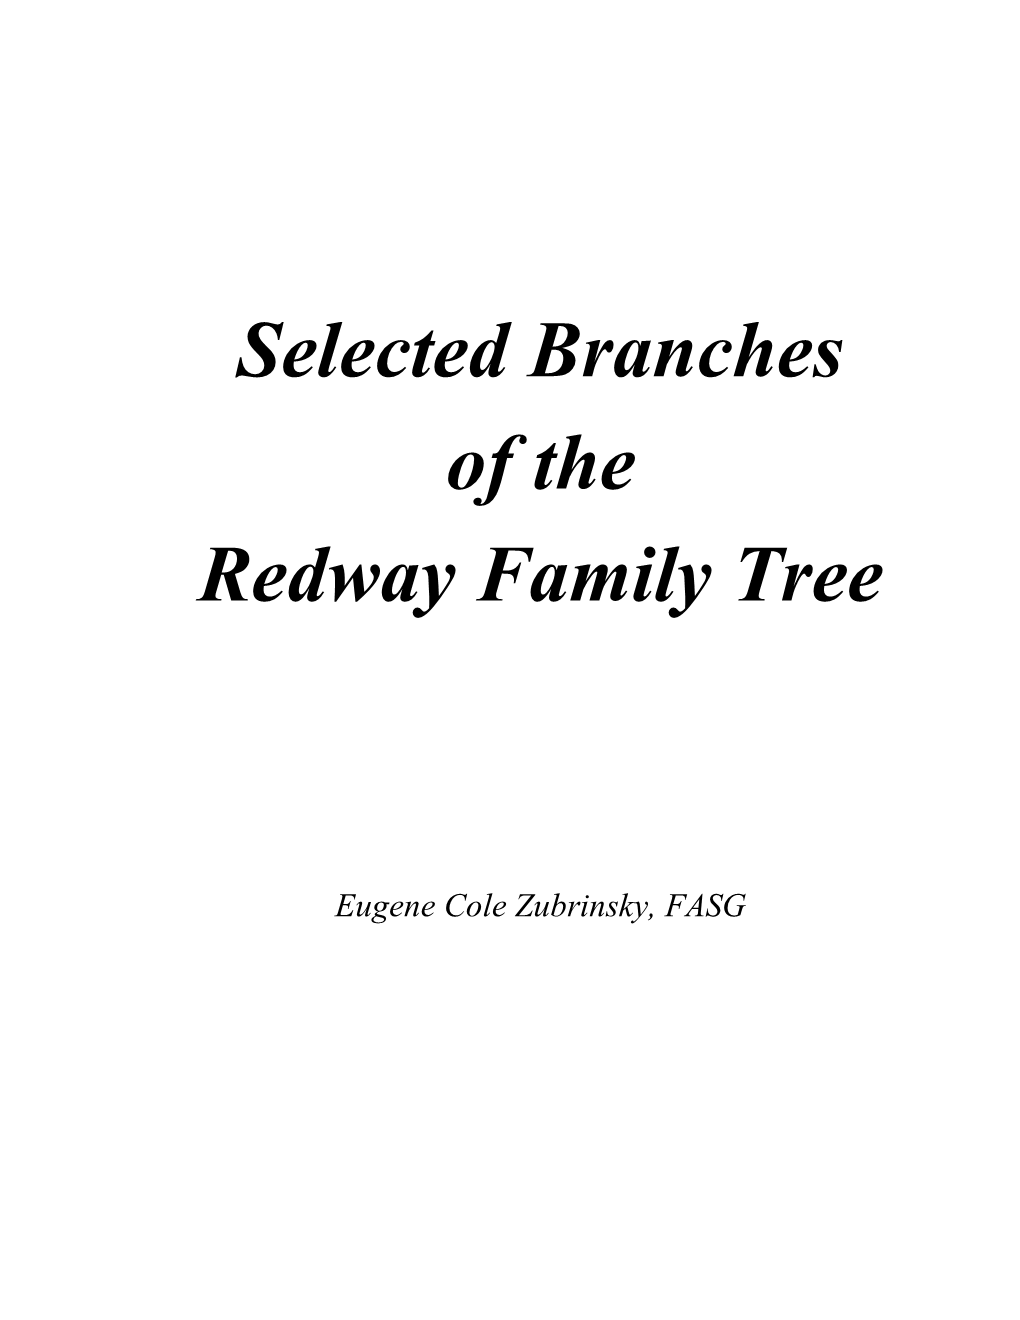 Selected Branches of the Redway Family Tree